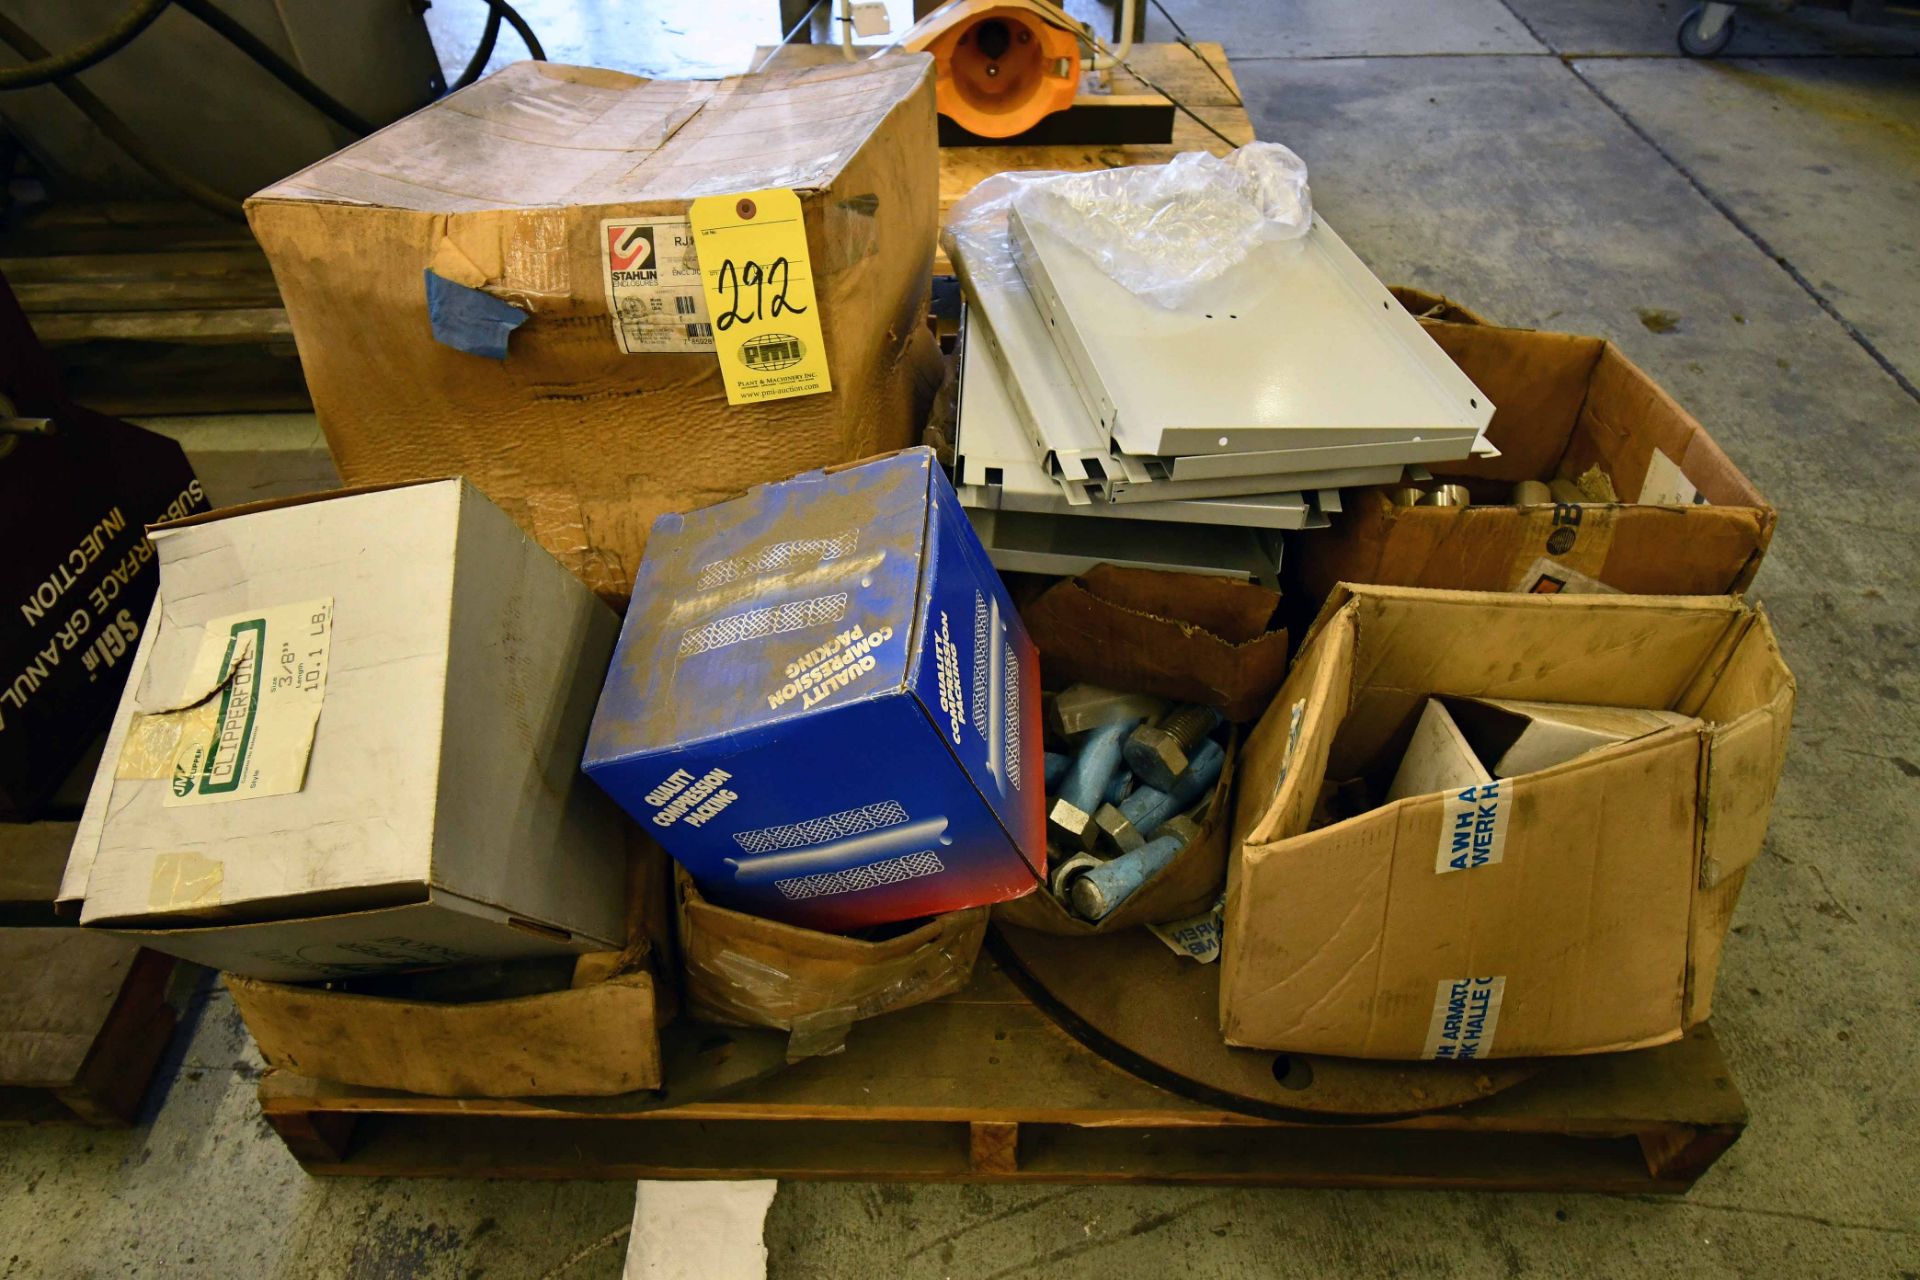 LOT OF SHOP SUPPLIES, misc. (on one pallet)